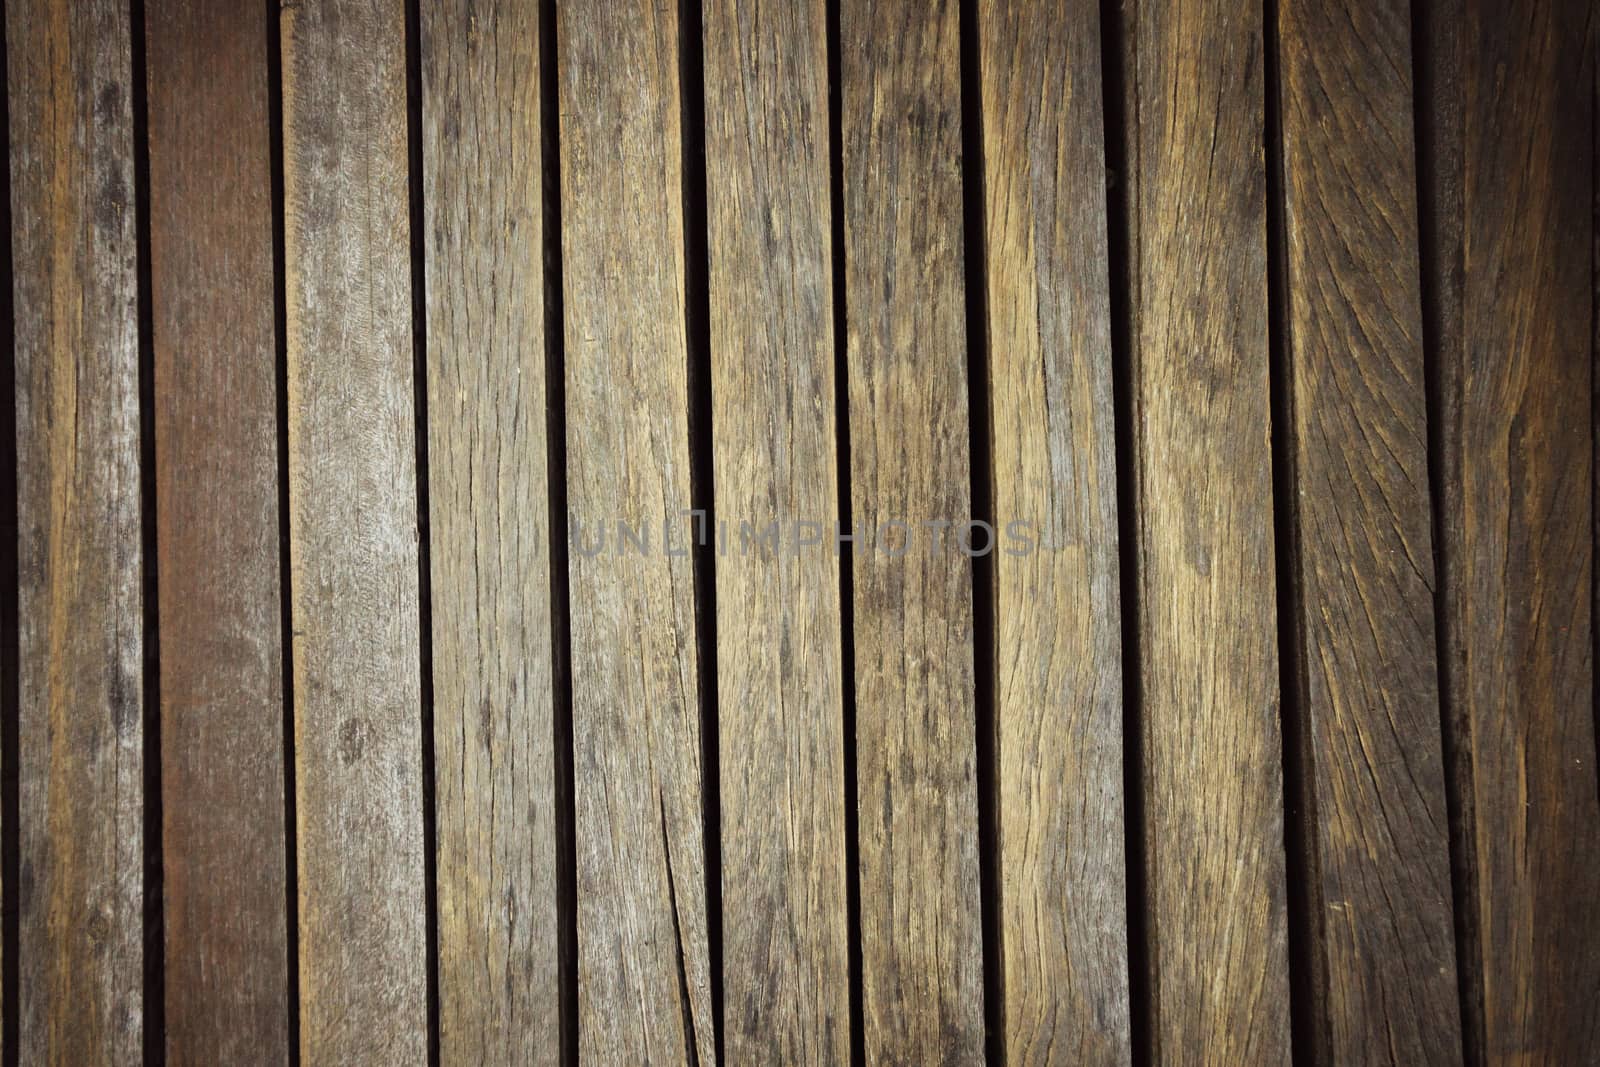 High resolution wood texture background by nopparats